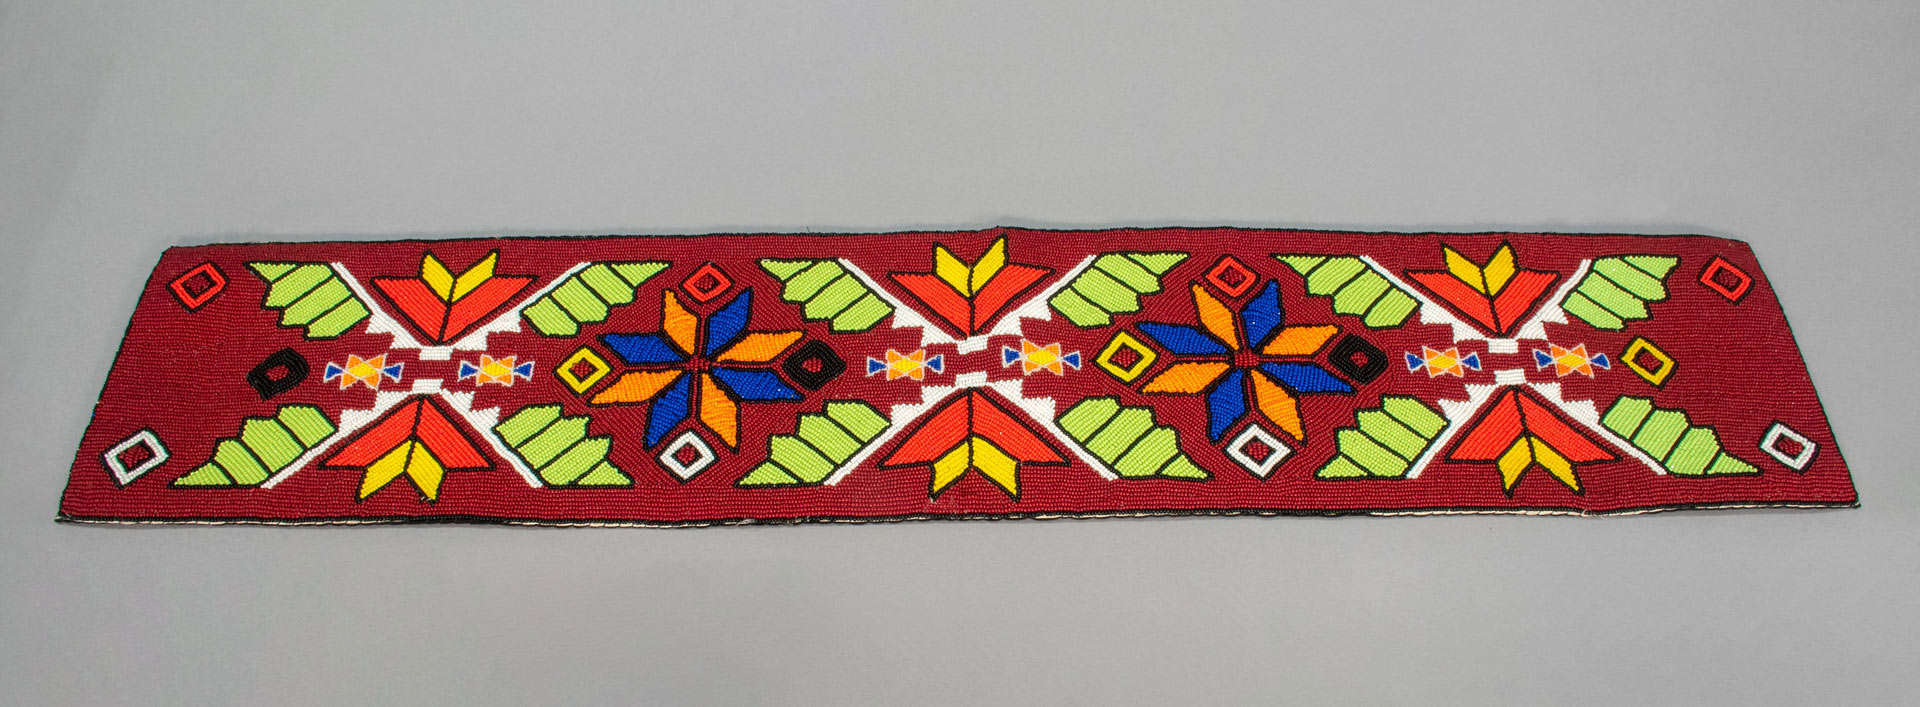 long red piece of fabric with colorful pattern